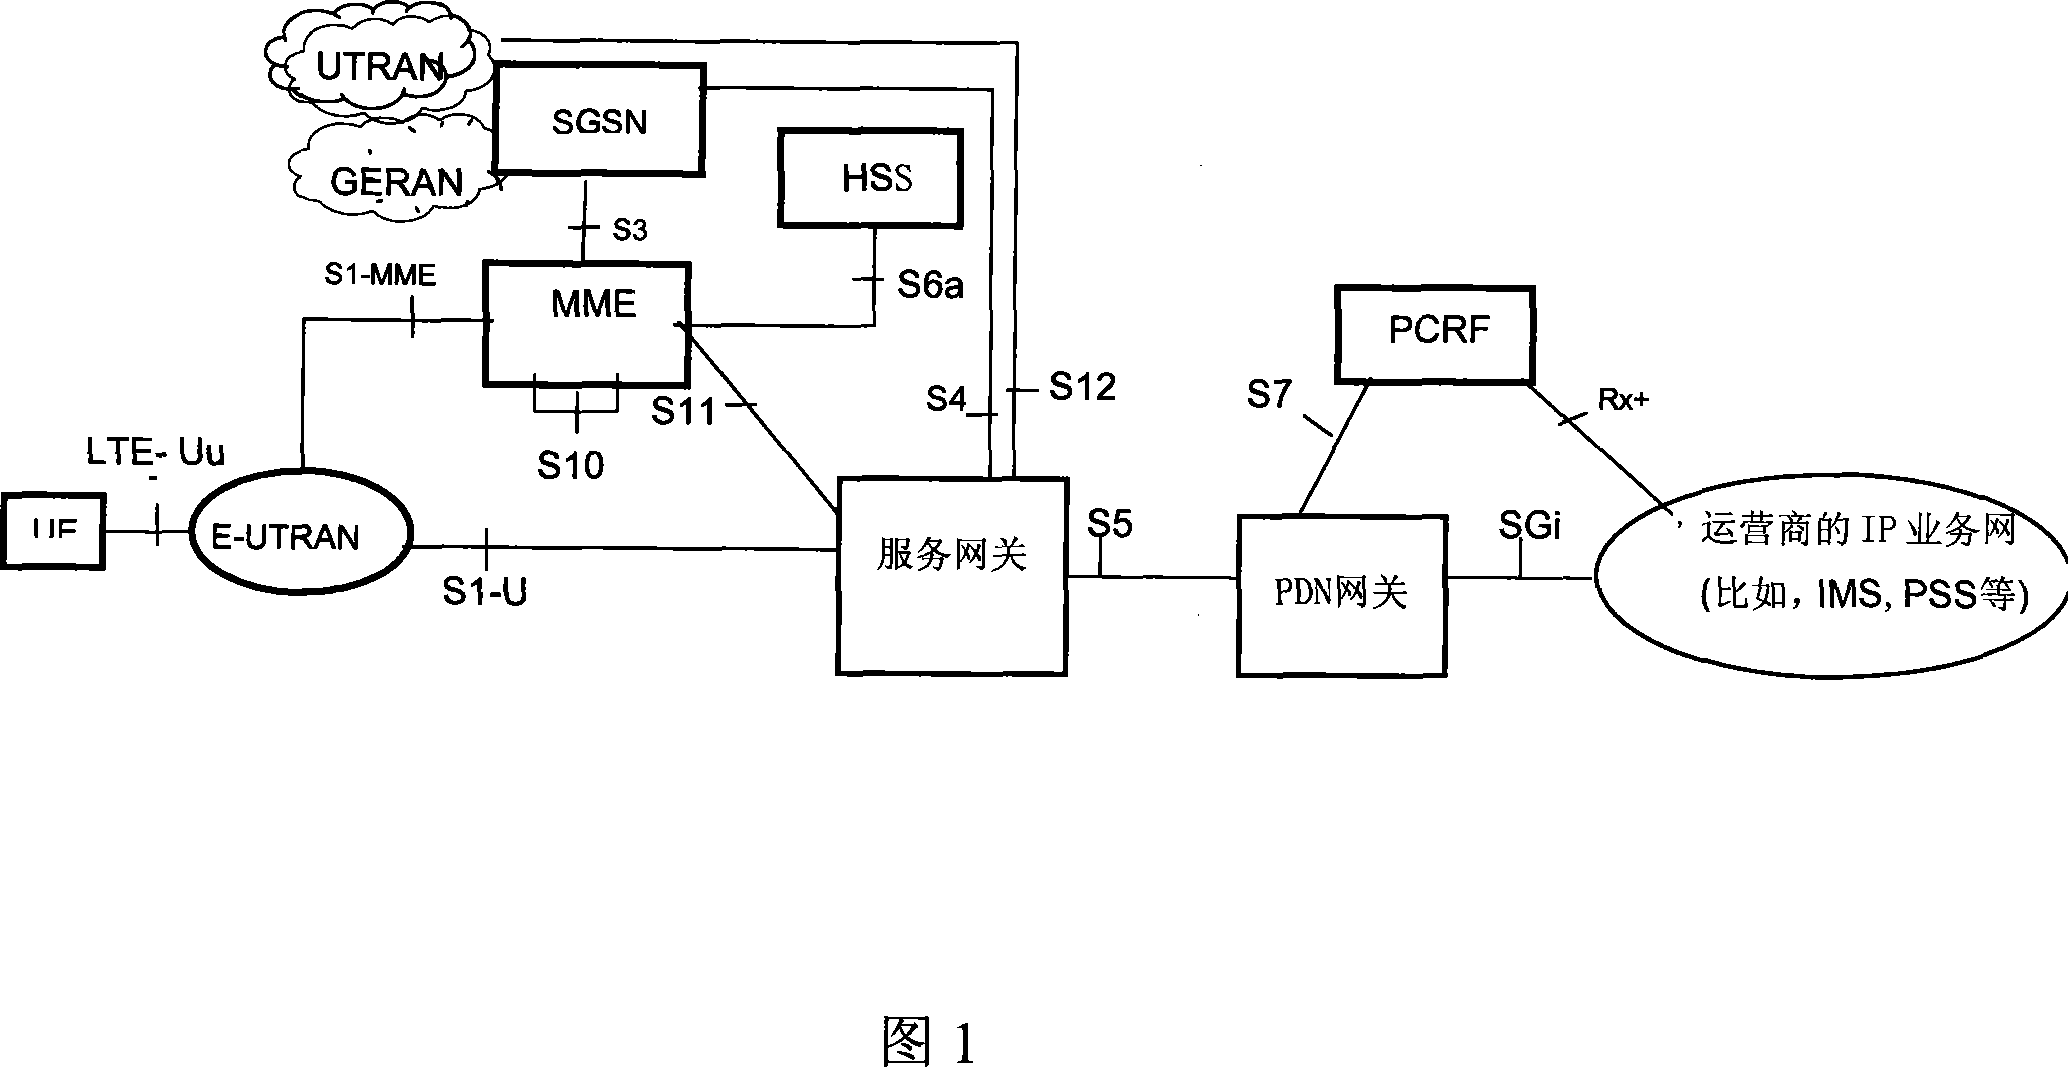 A bearer service type acquisition and load-carrying net shift implementation method